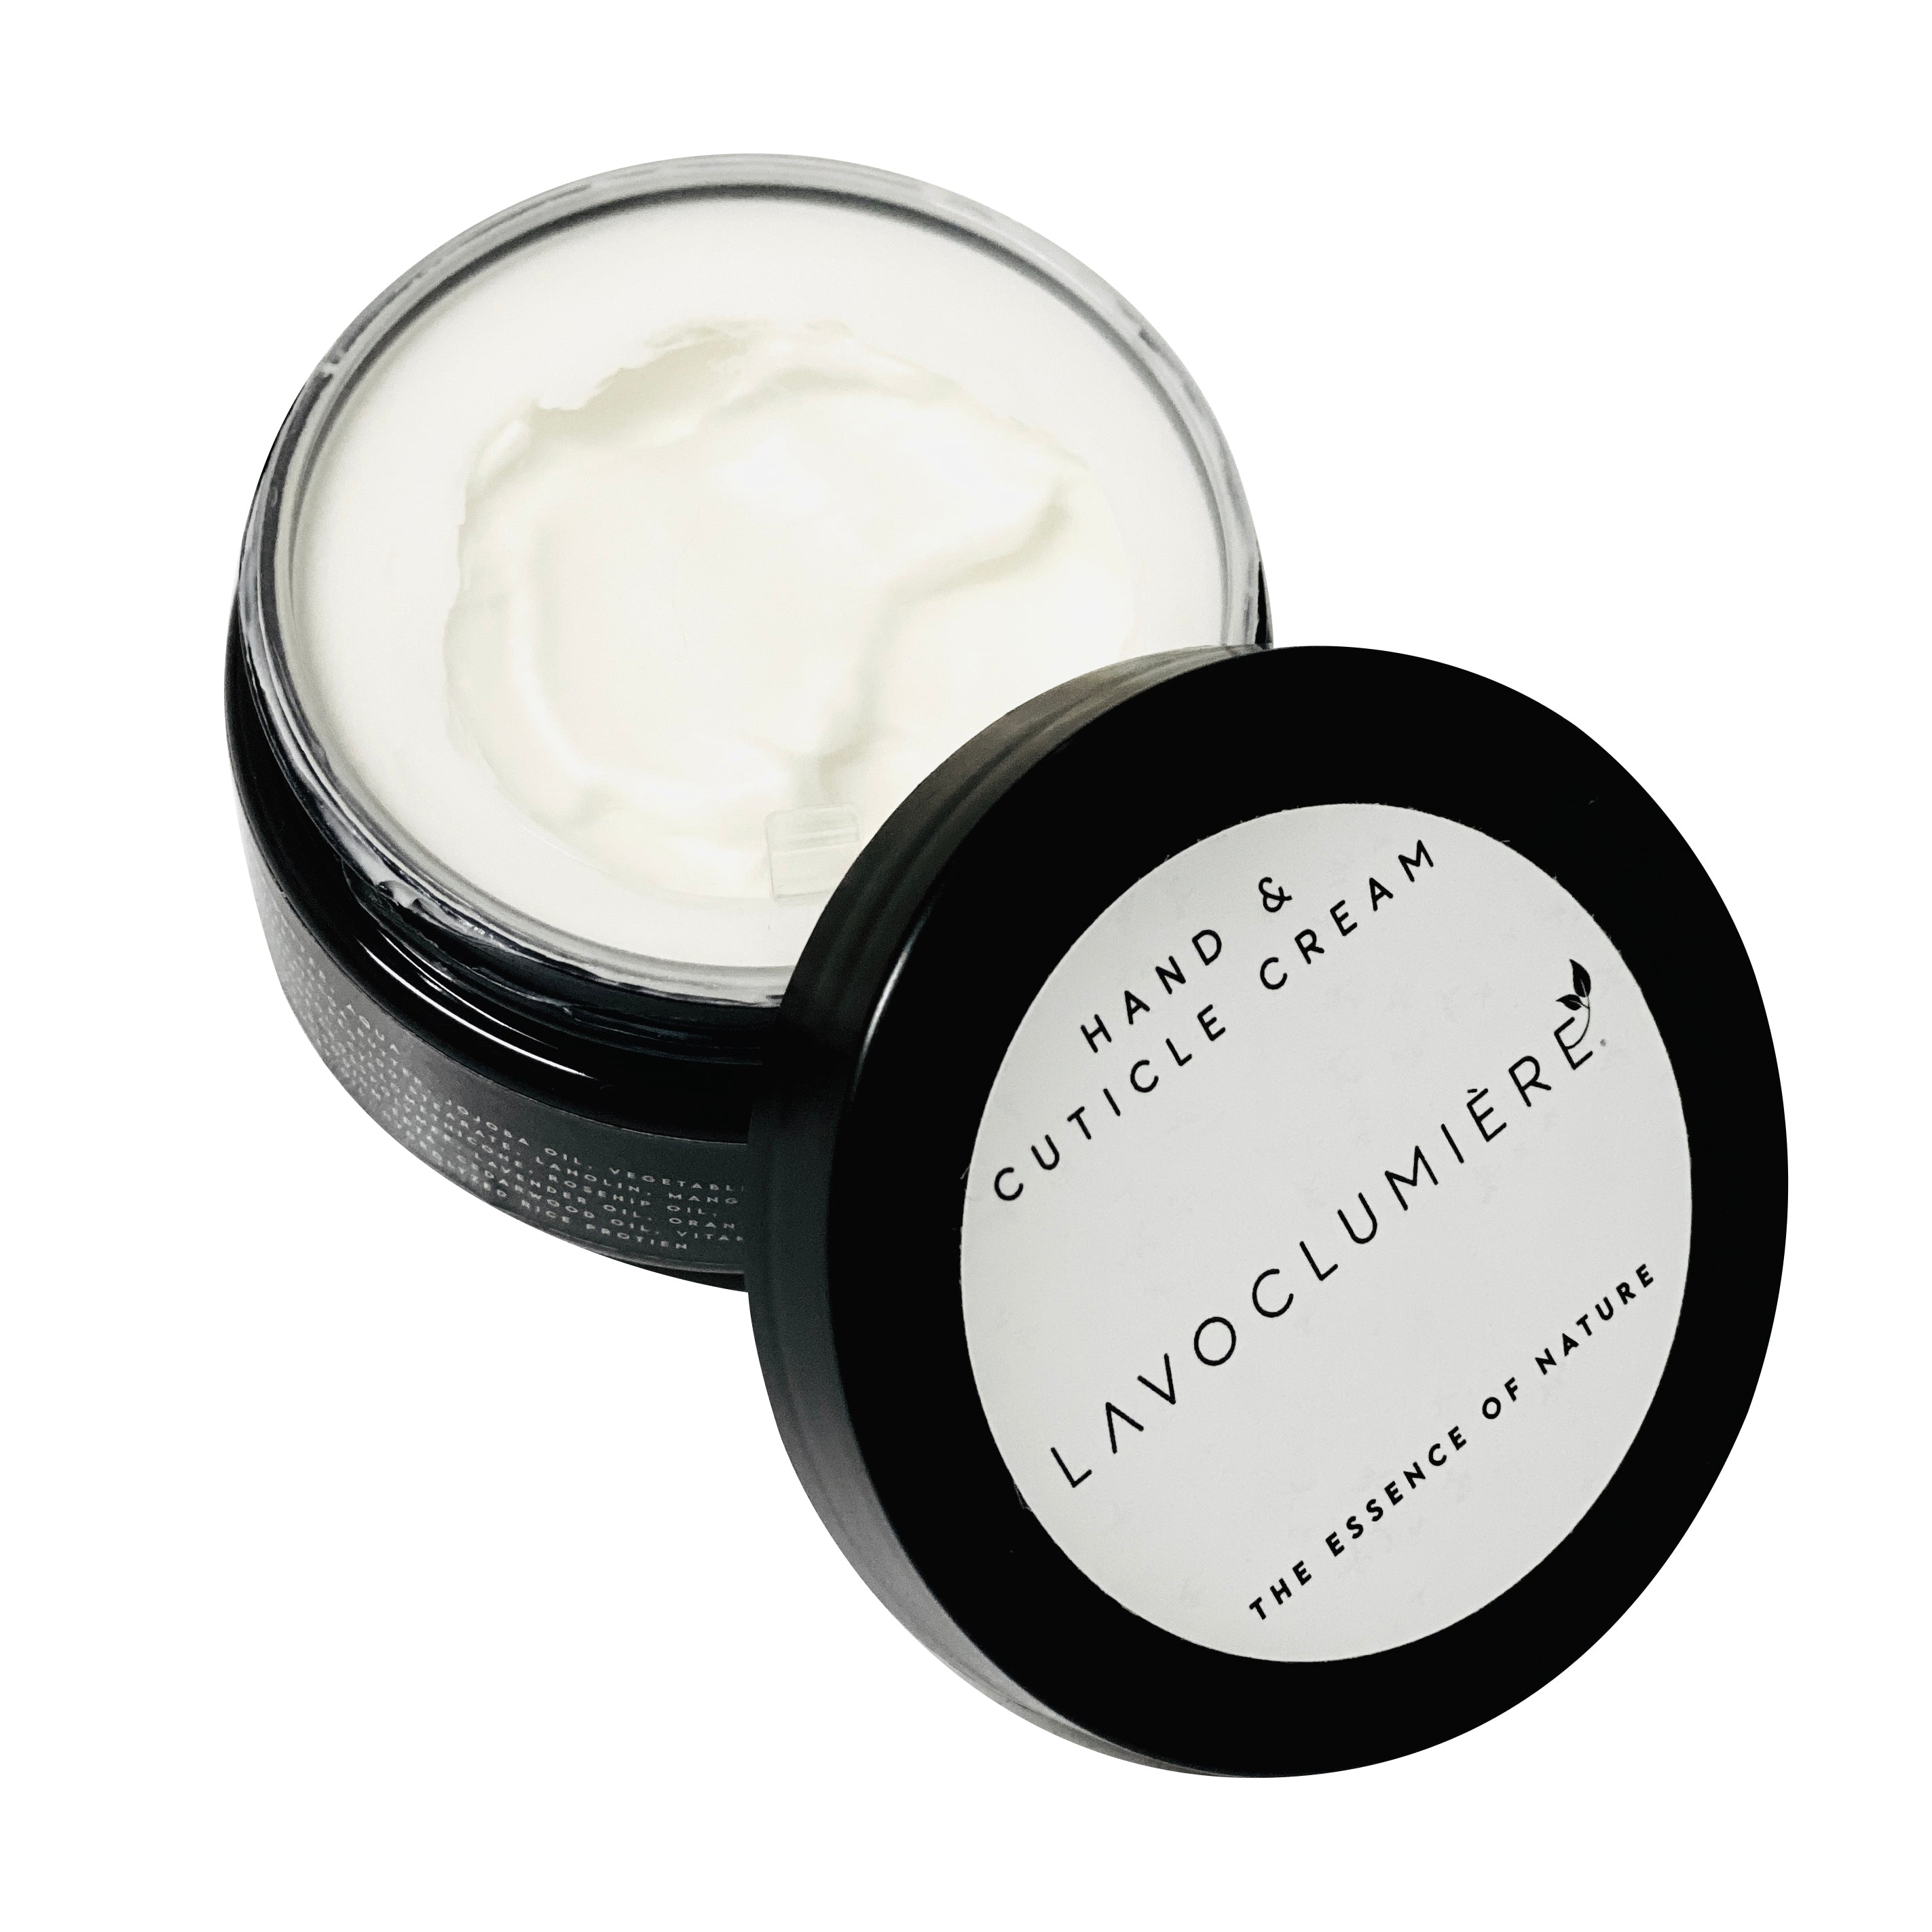 Hand And Cuticle Cream | Lavocderma | Reviews on Judge.me